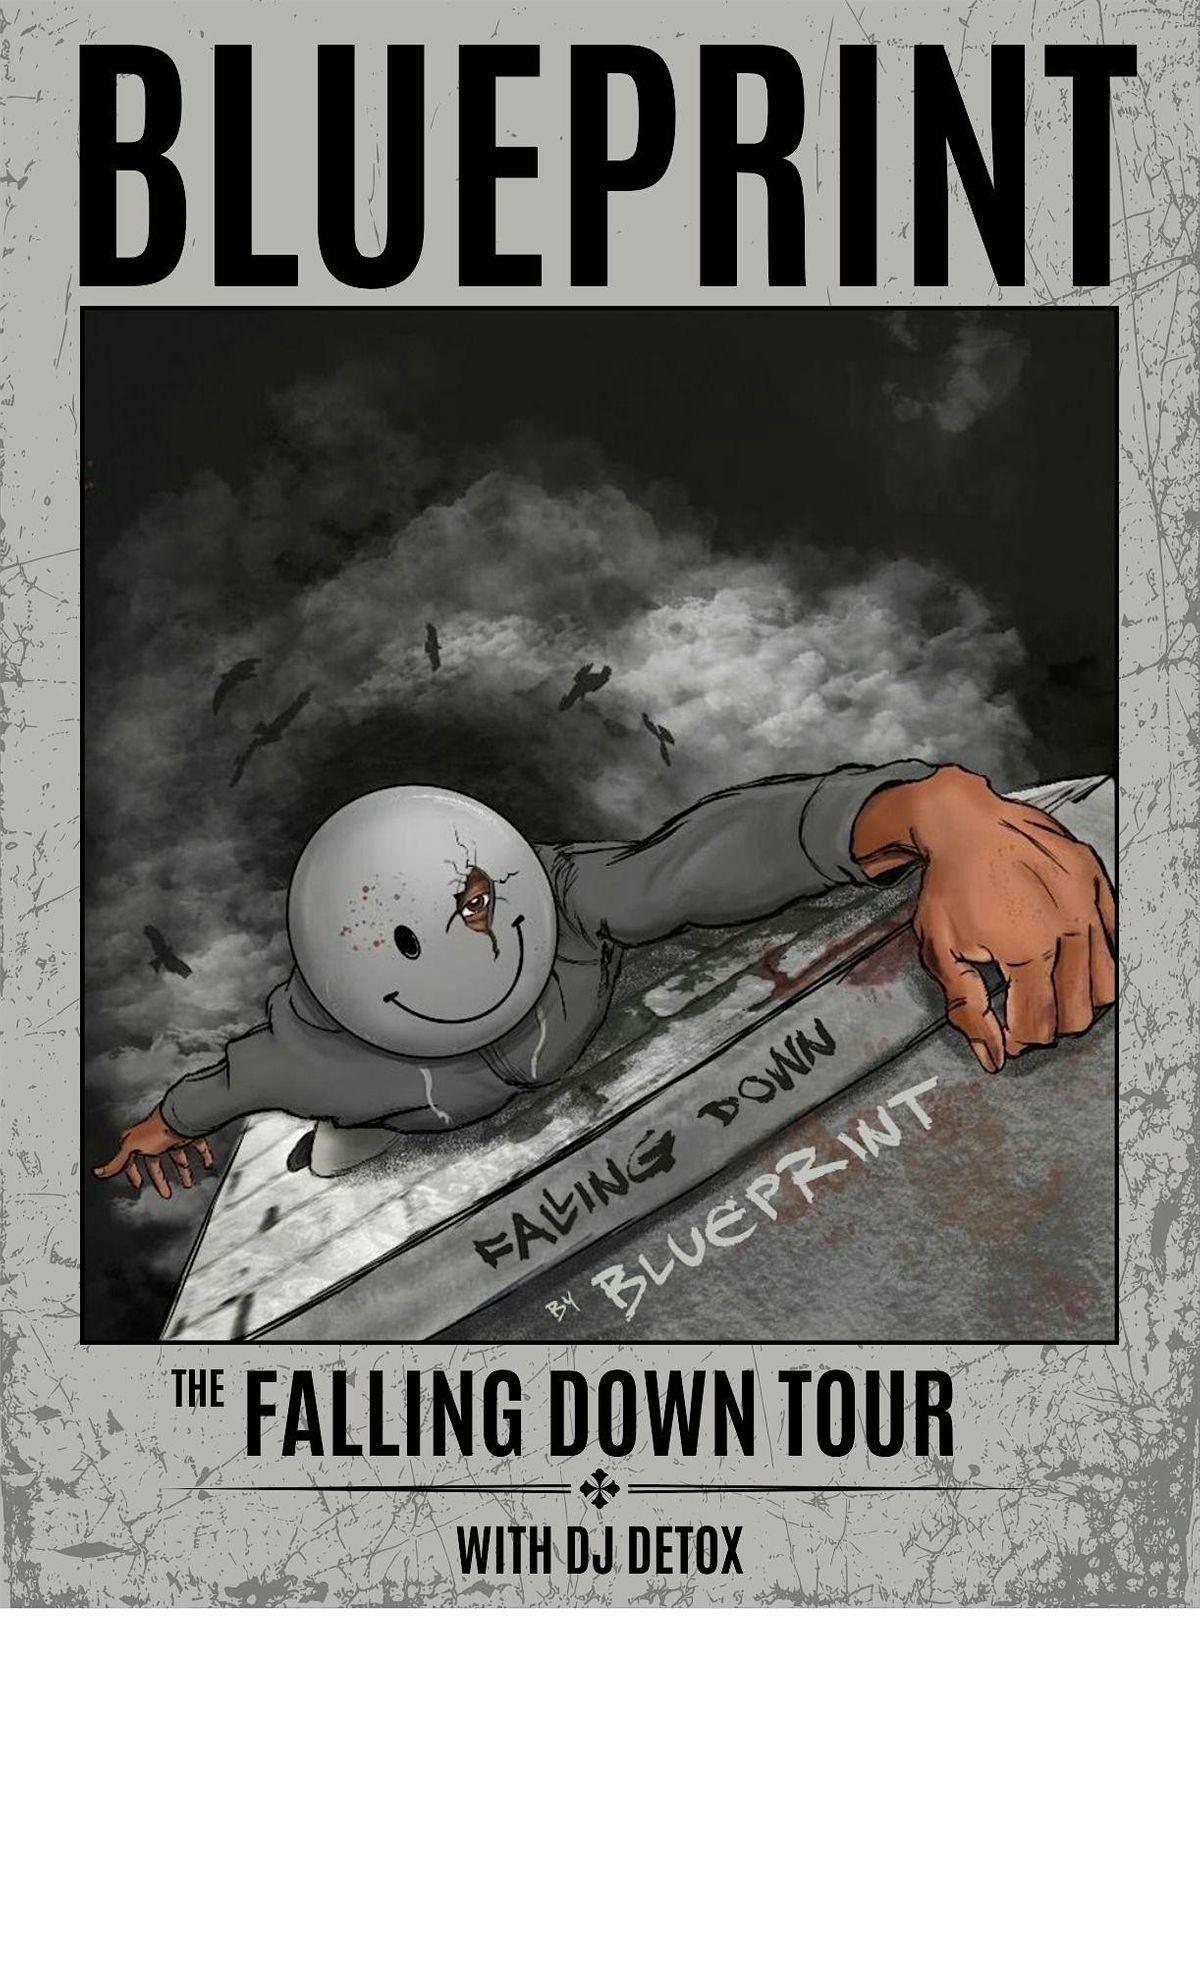 Blueprint "The Falling Down Tour" ft. Mugs and Pockets